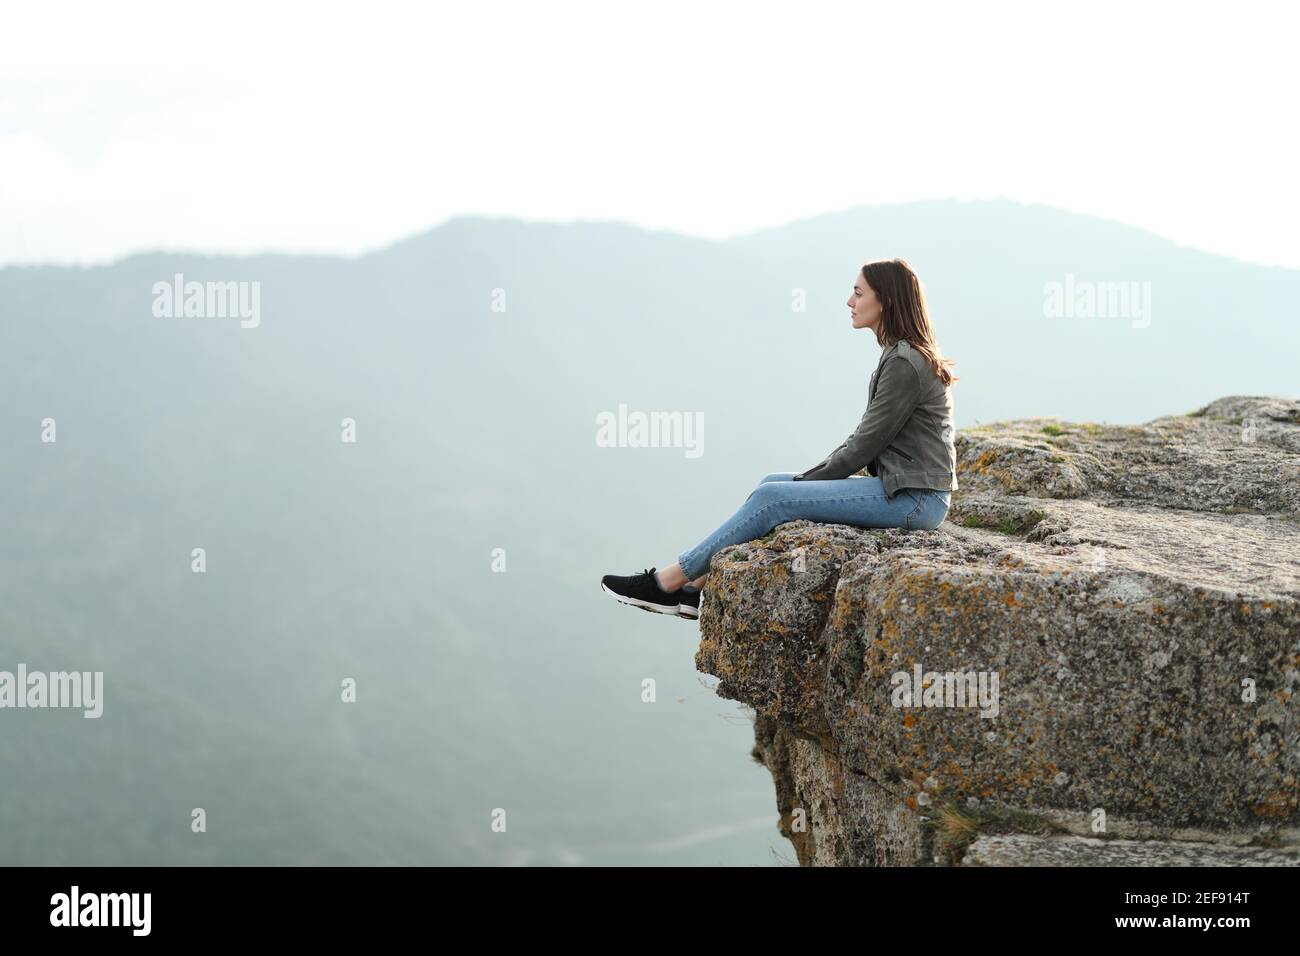 Full body profile of a pensive woman sitting contemplating views on the top of a cliff in the mountain Stock Photo